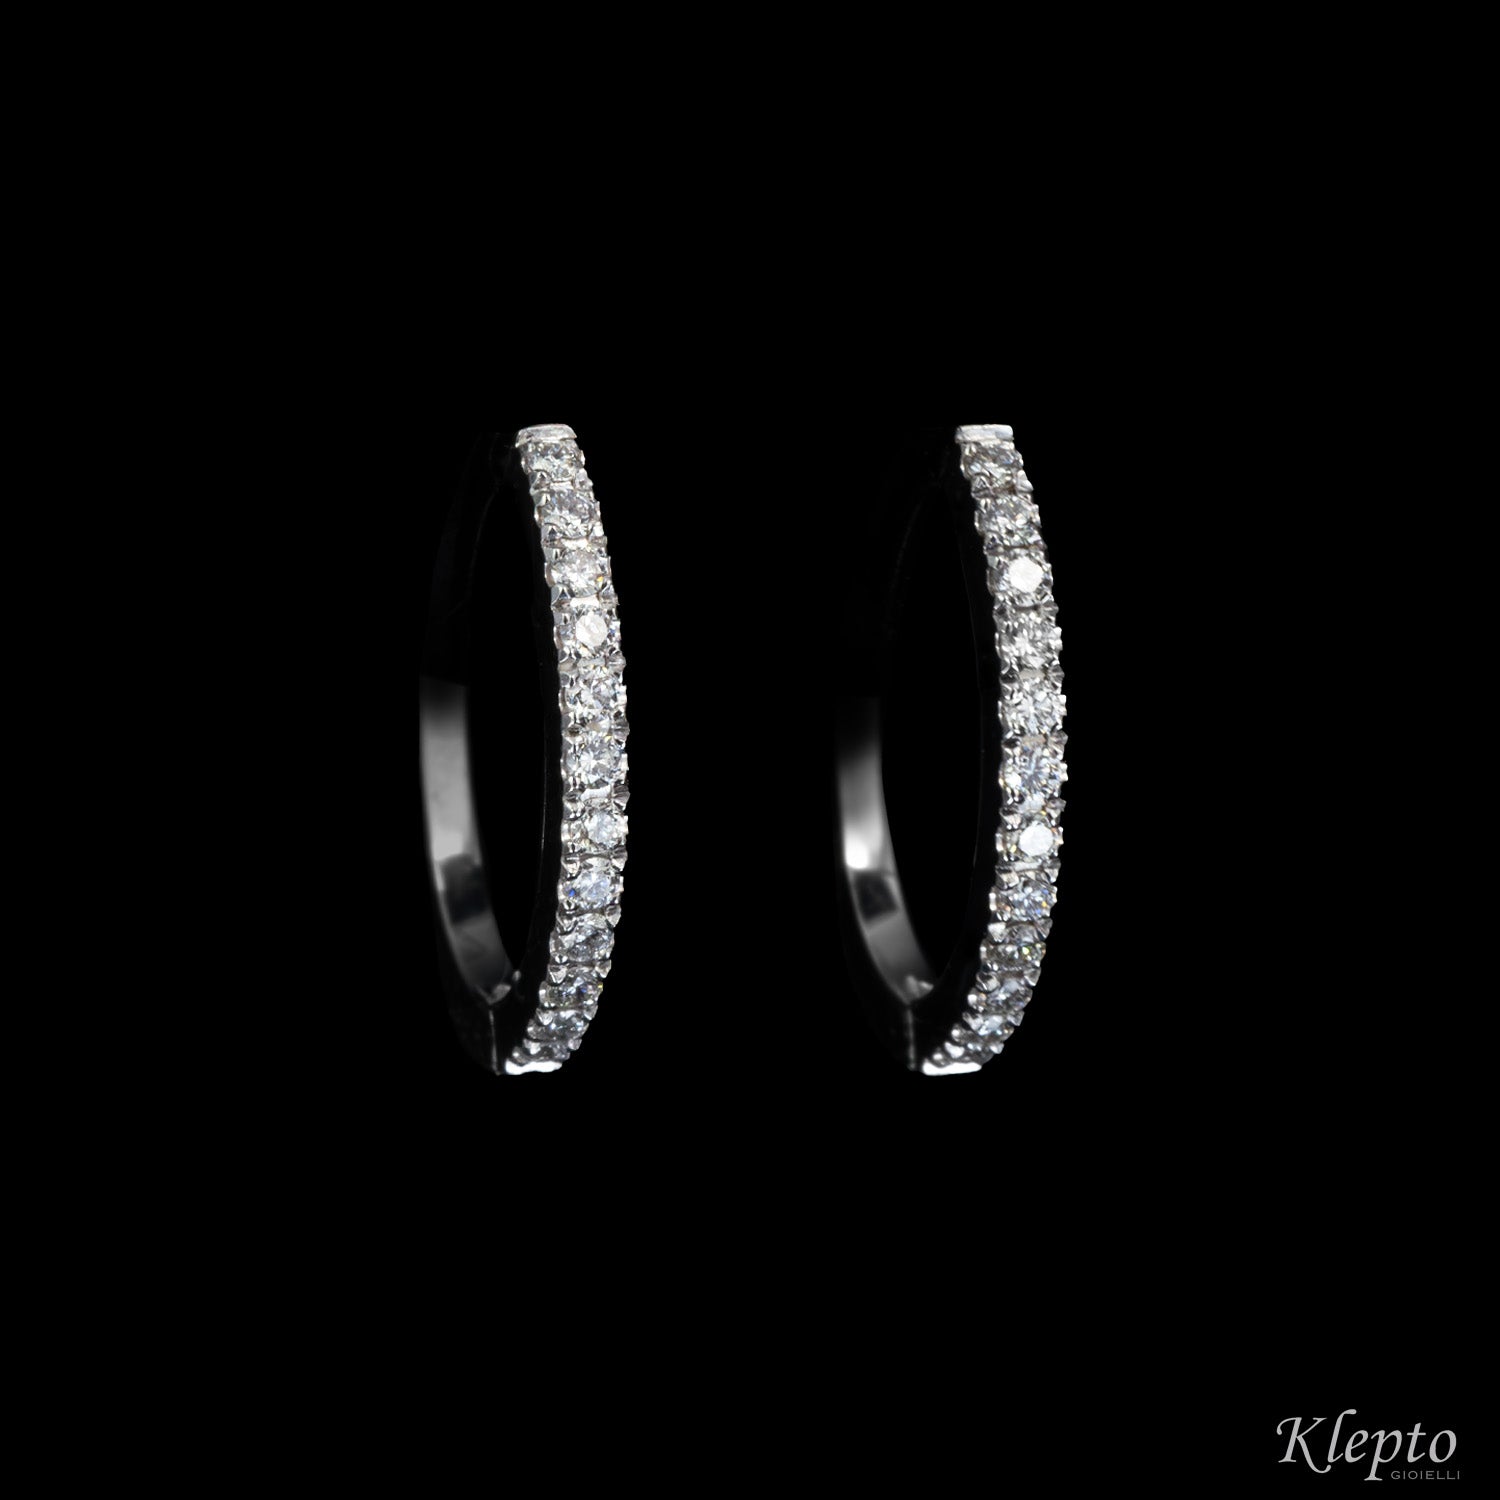 White gold oval circle earrings with diamonds